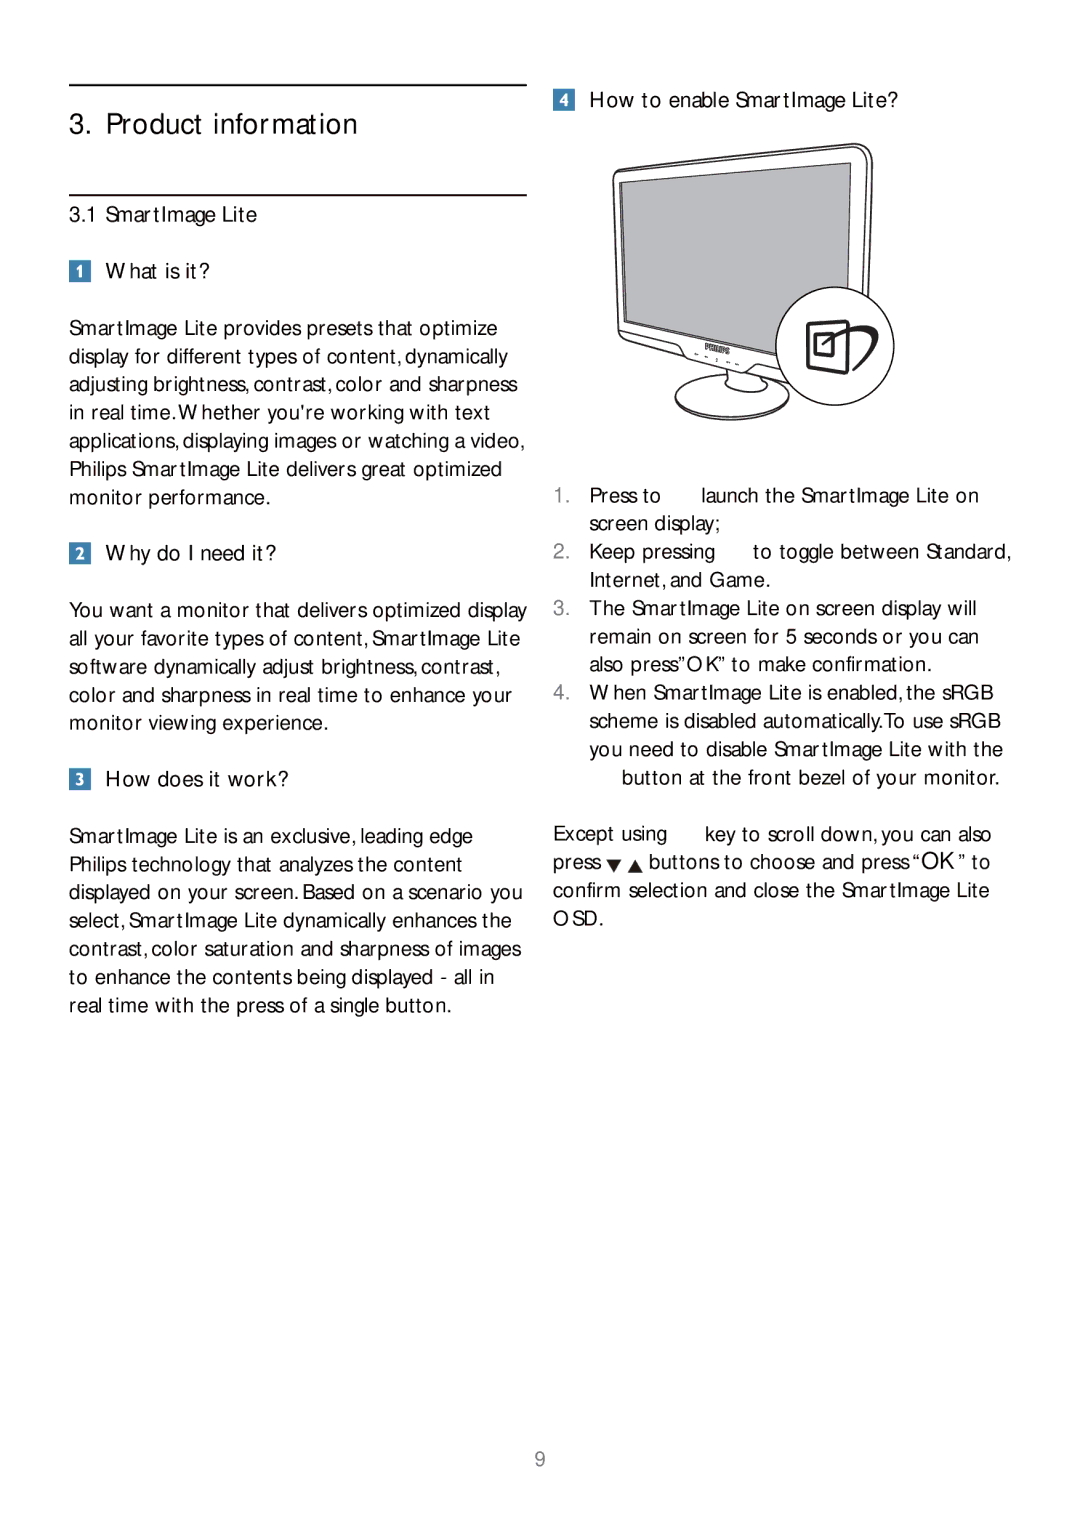 Philips 192E2SB2 user manual Product information, SmartImage Lite What is it?, Why do I need it?, How does it work? 